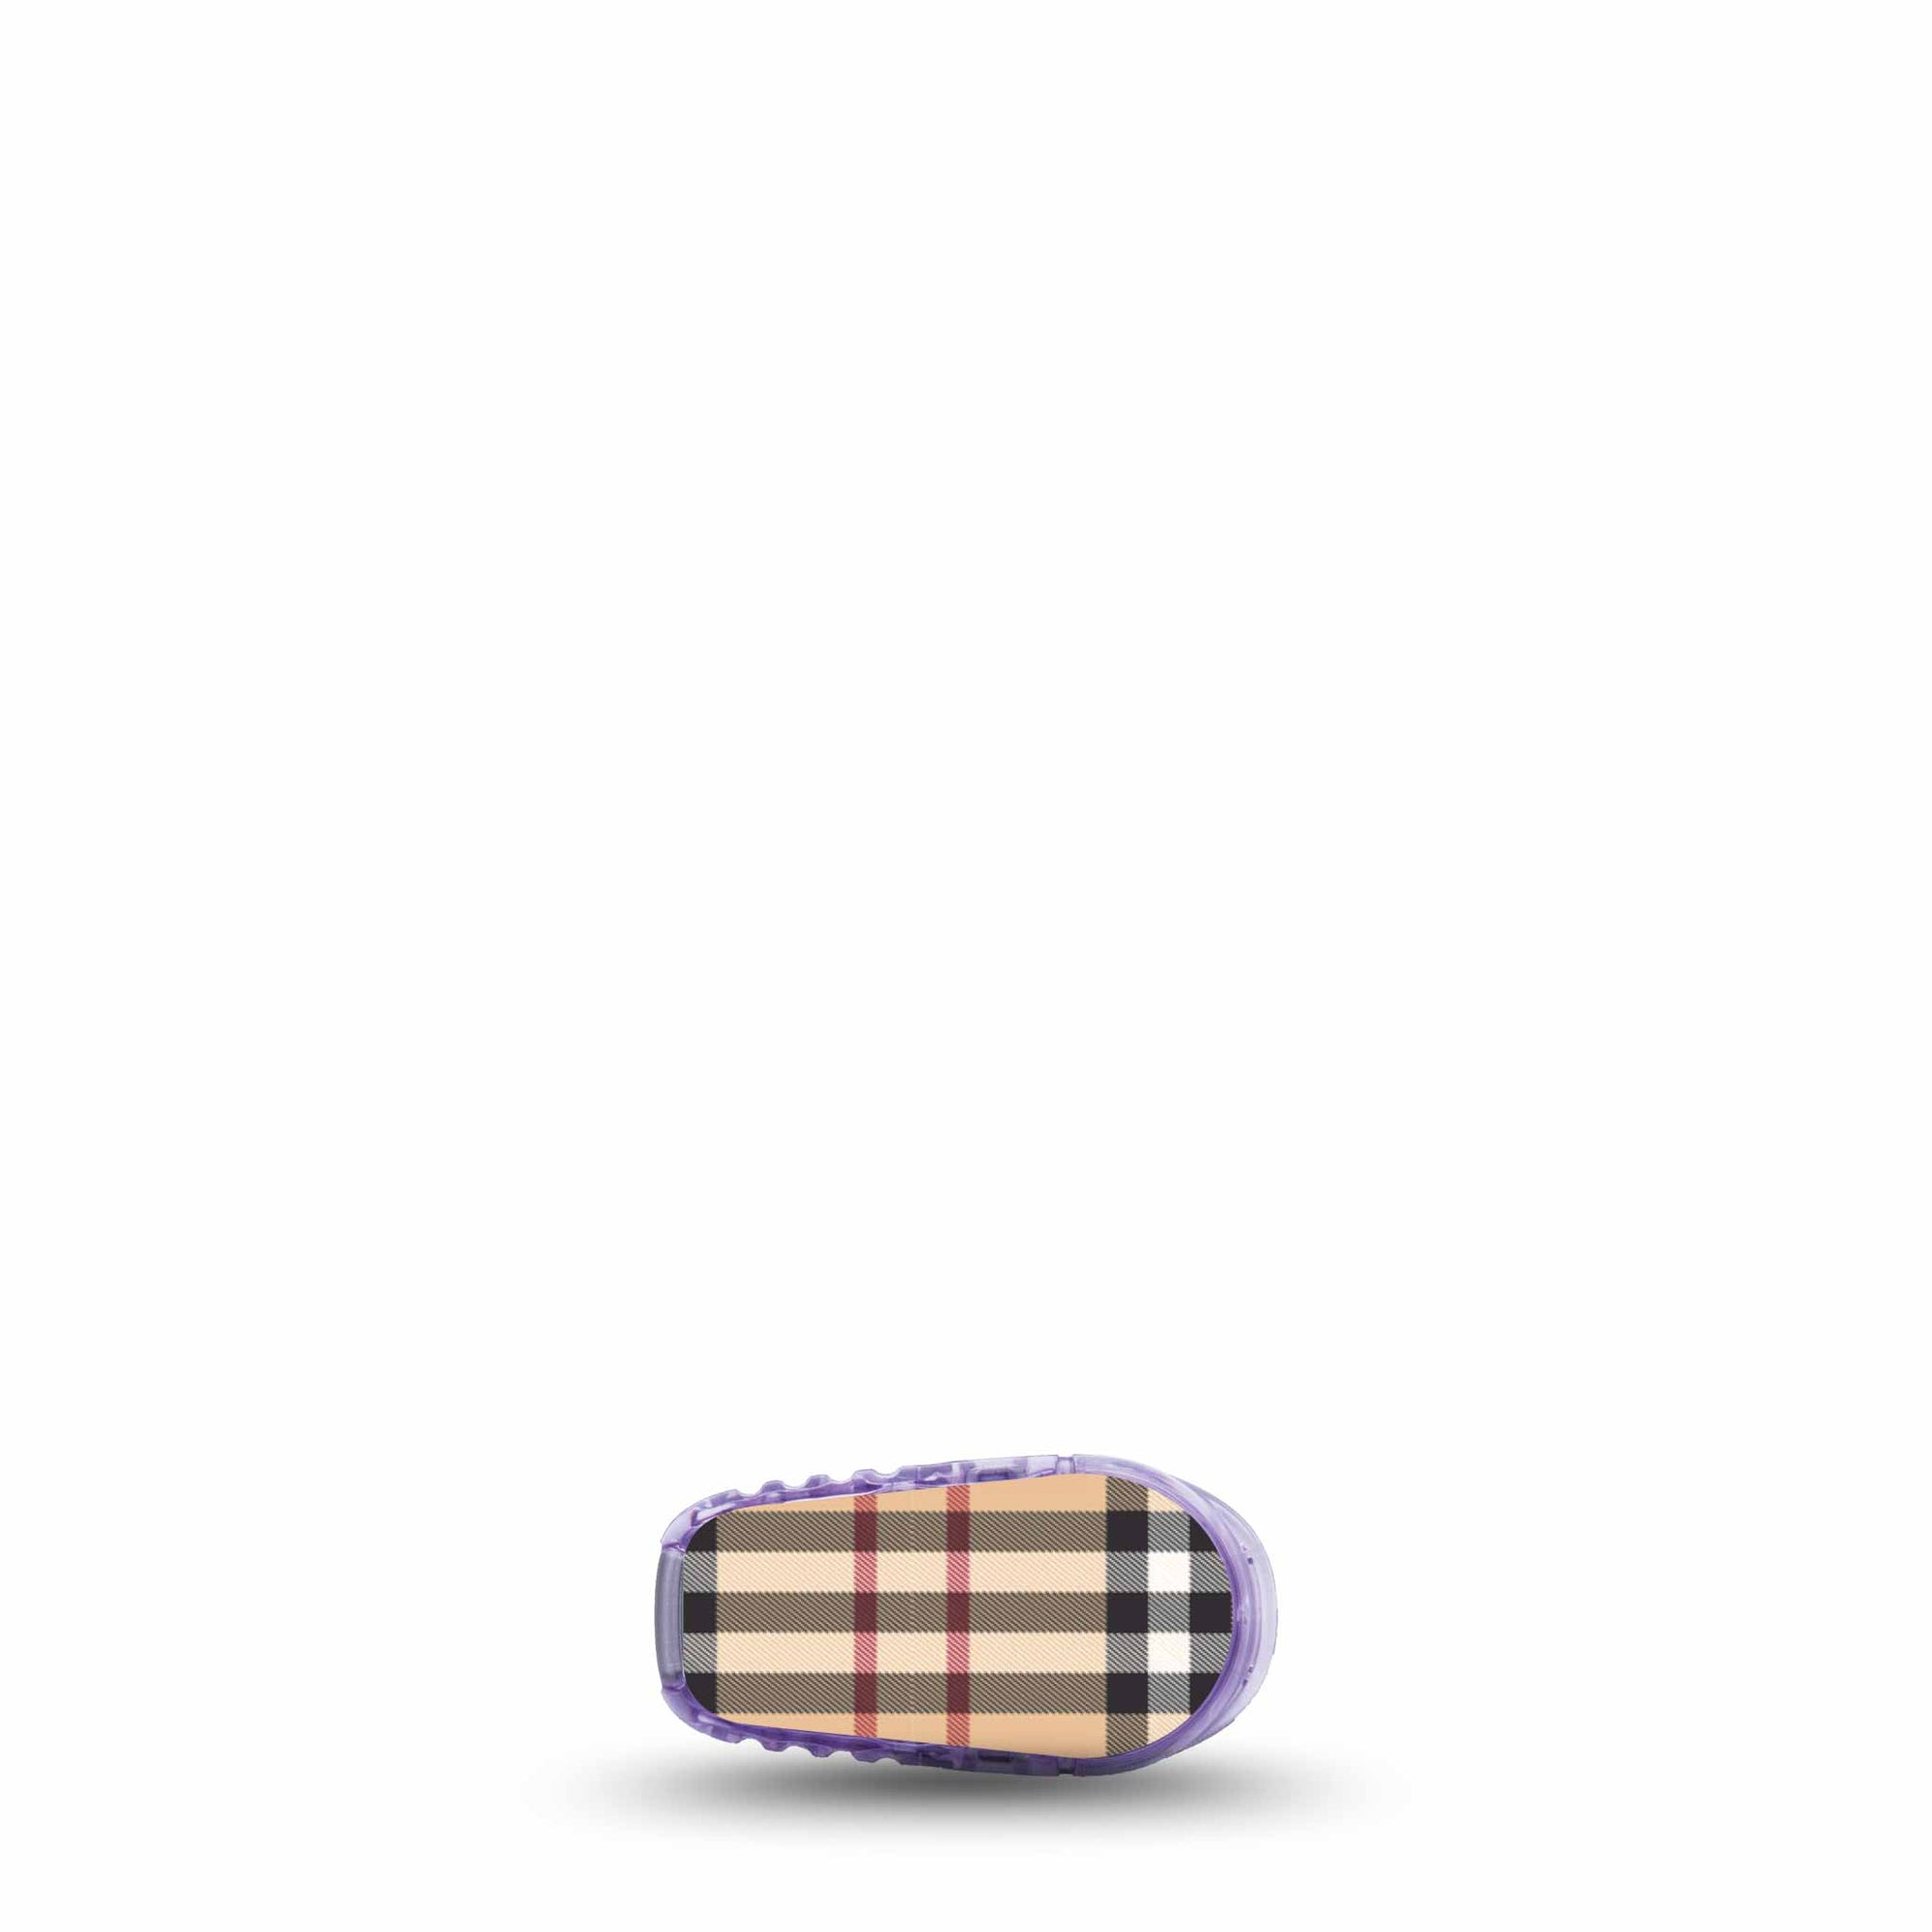 ExpressionMed Plaid and Bougie Dexcom G6 Transmitter Sticker